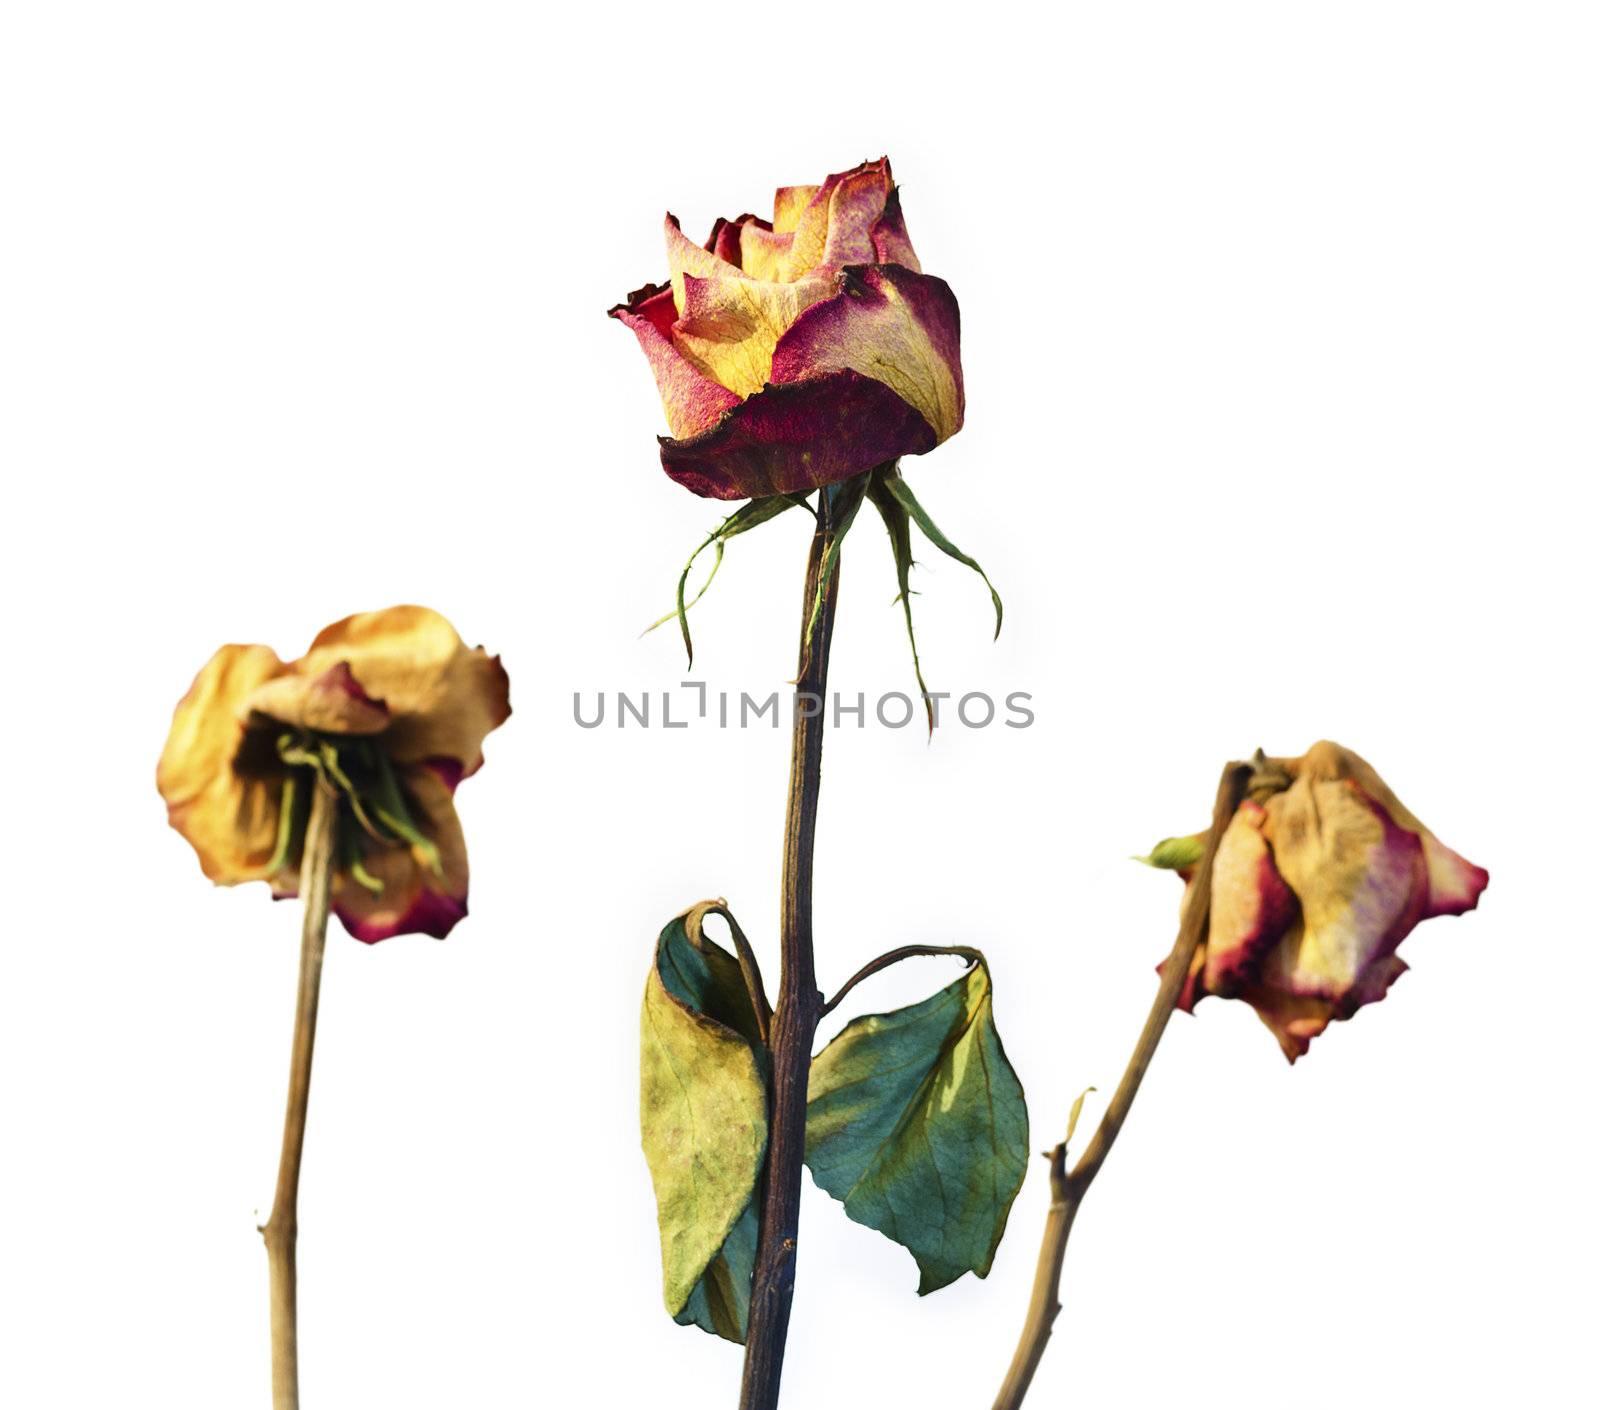 Withered roses on white background by nprause